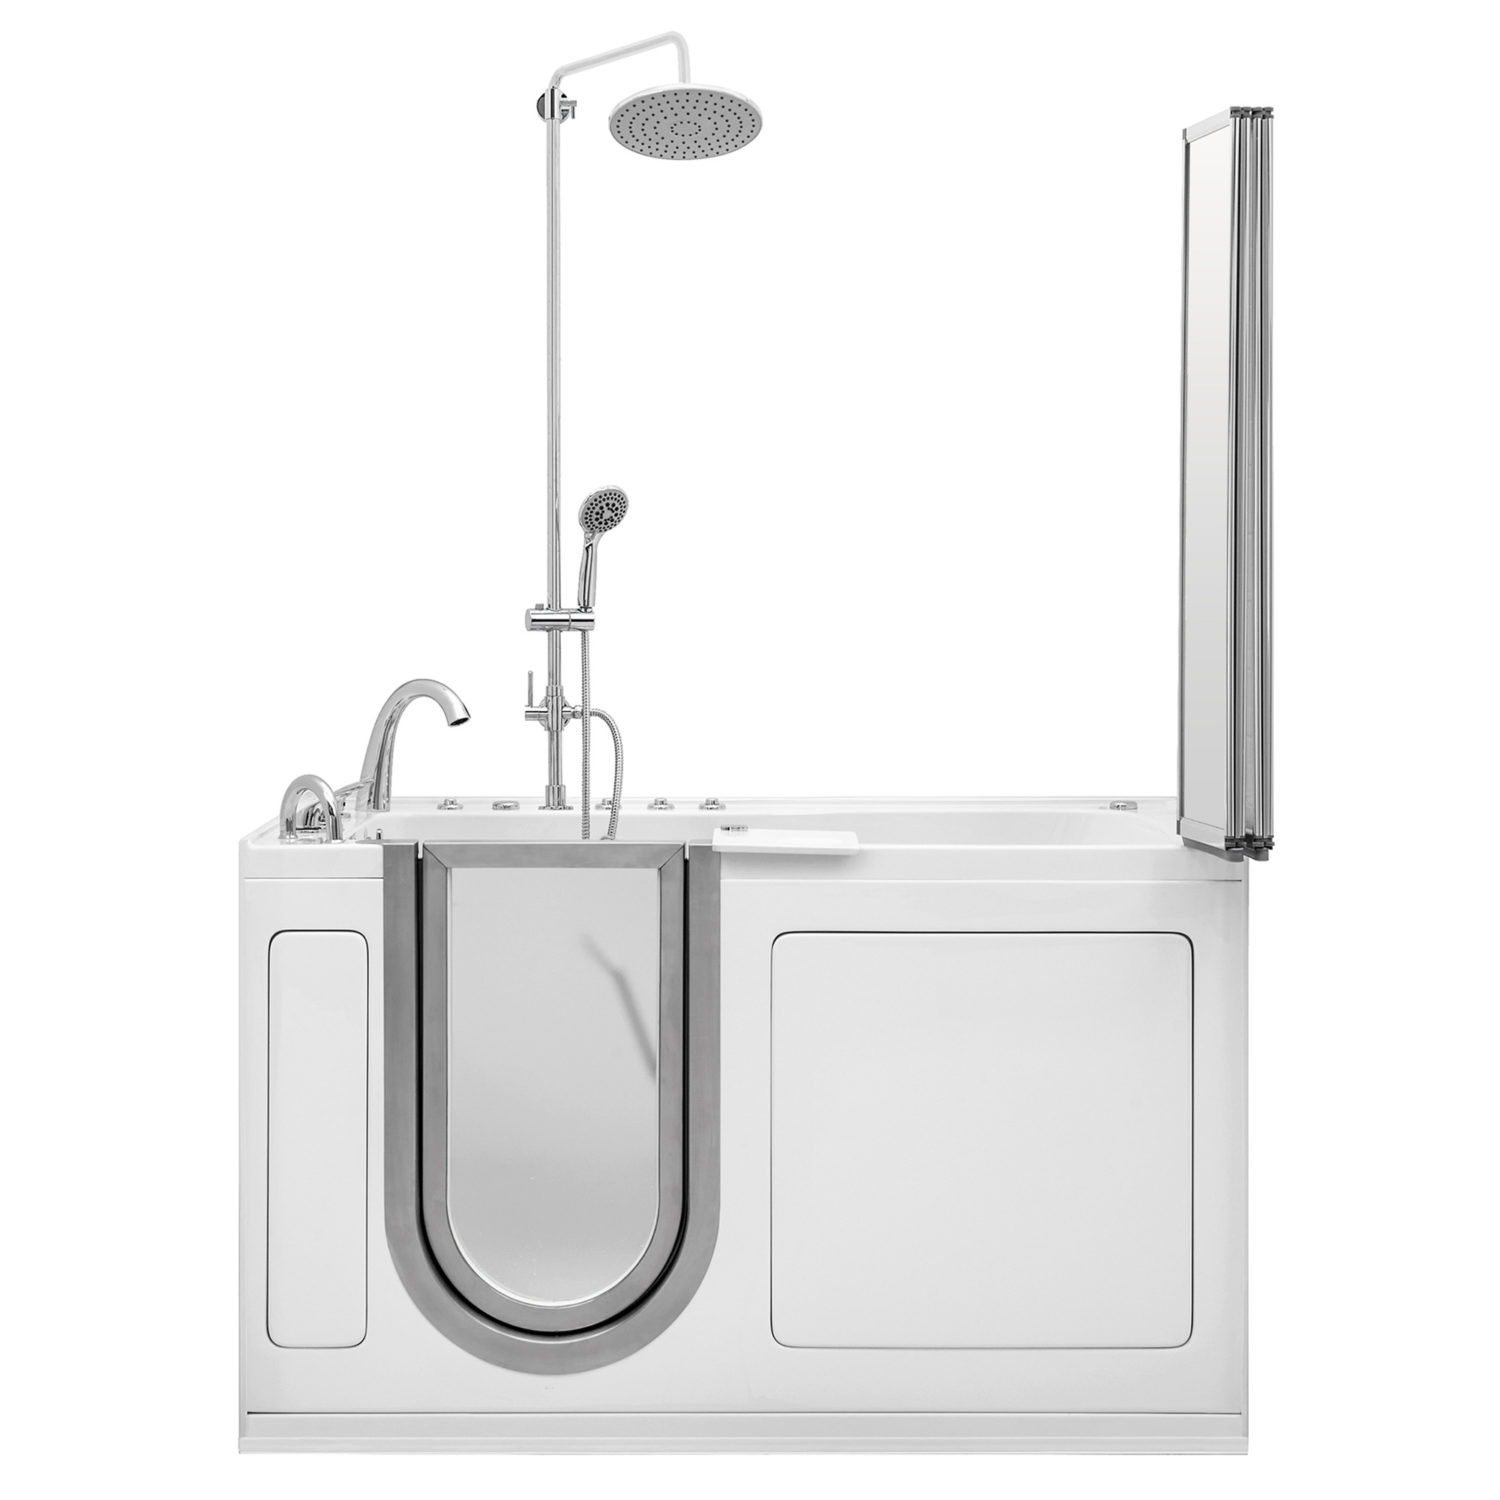 Ultimate Faucet Options (USA)